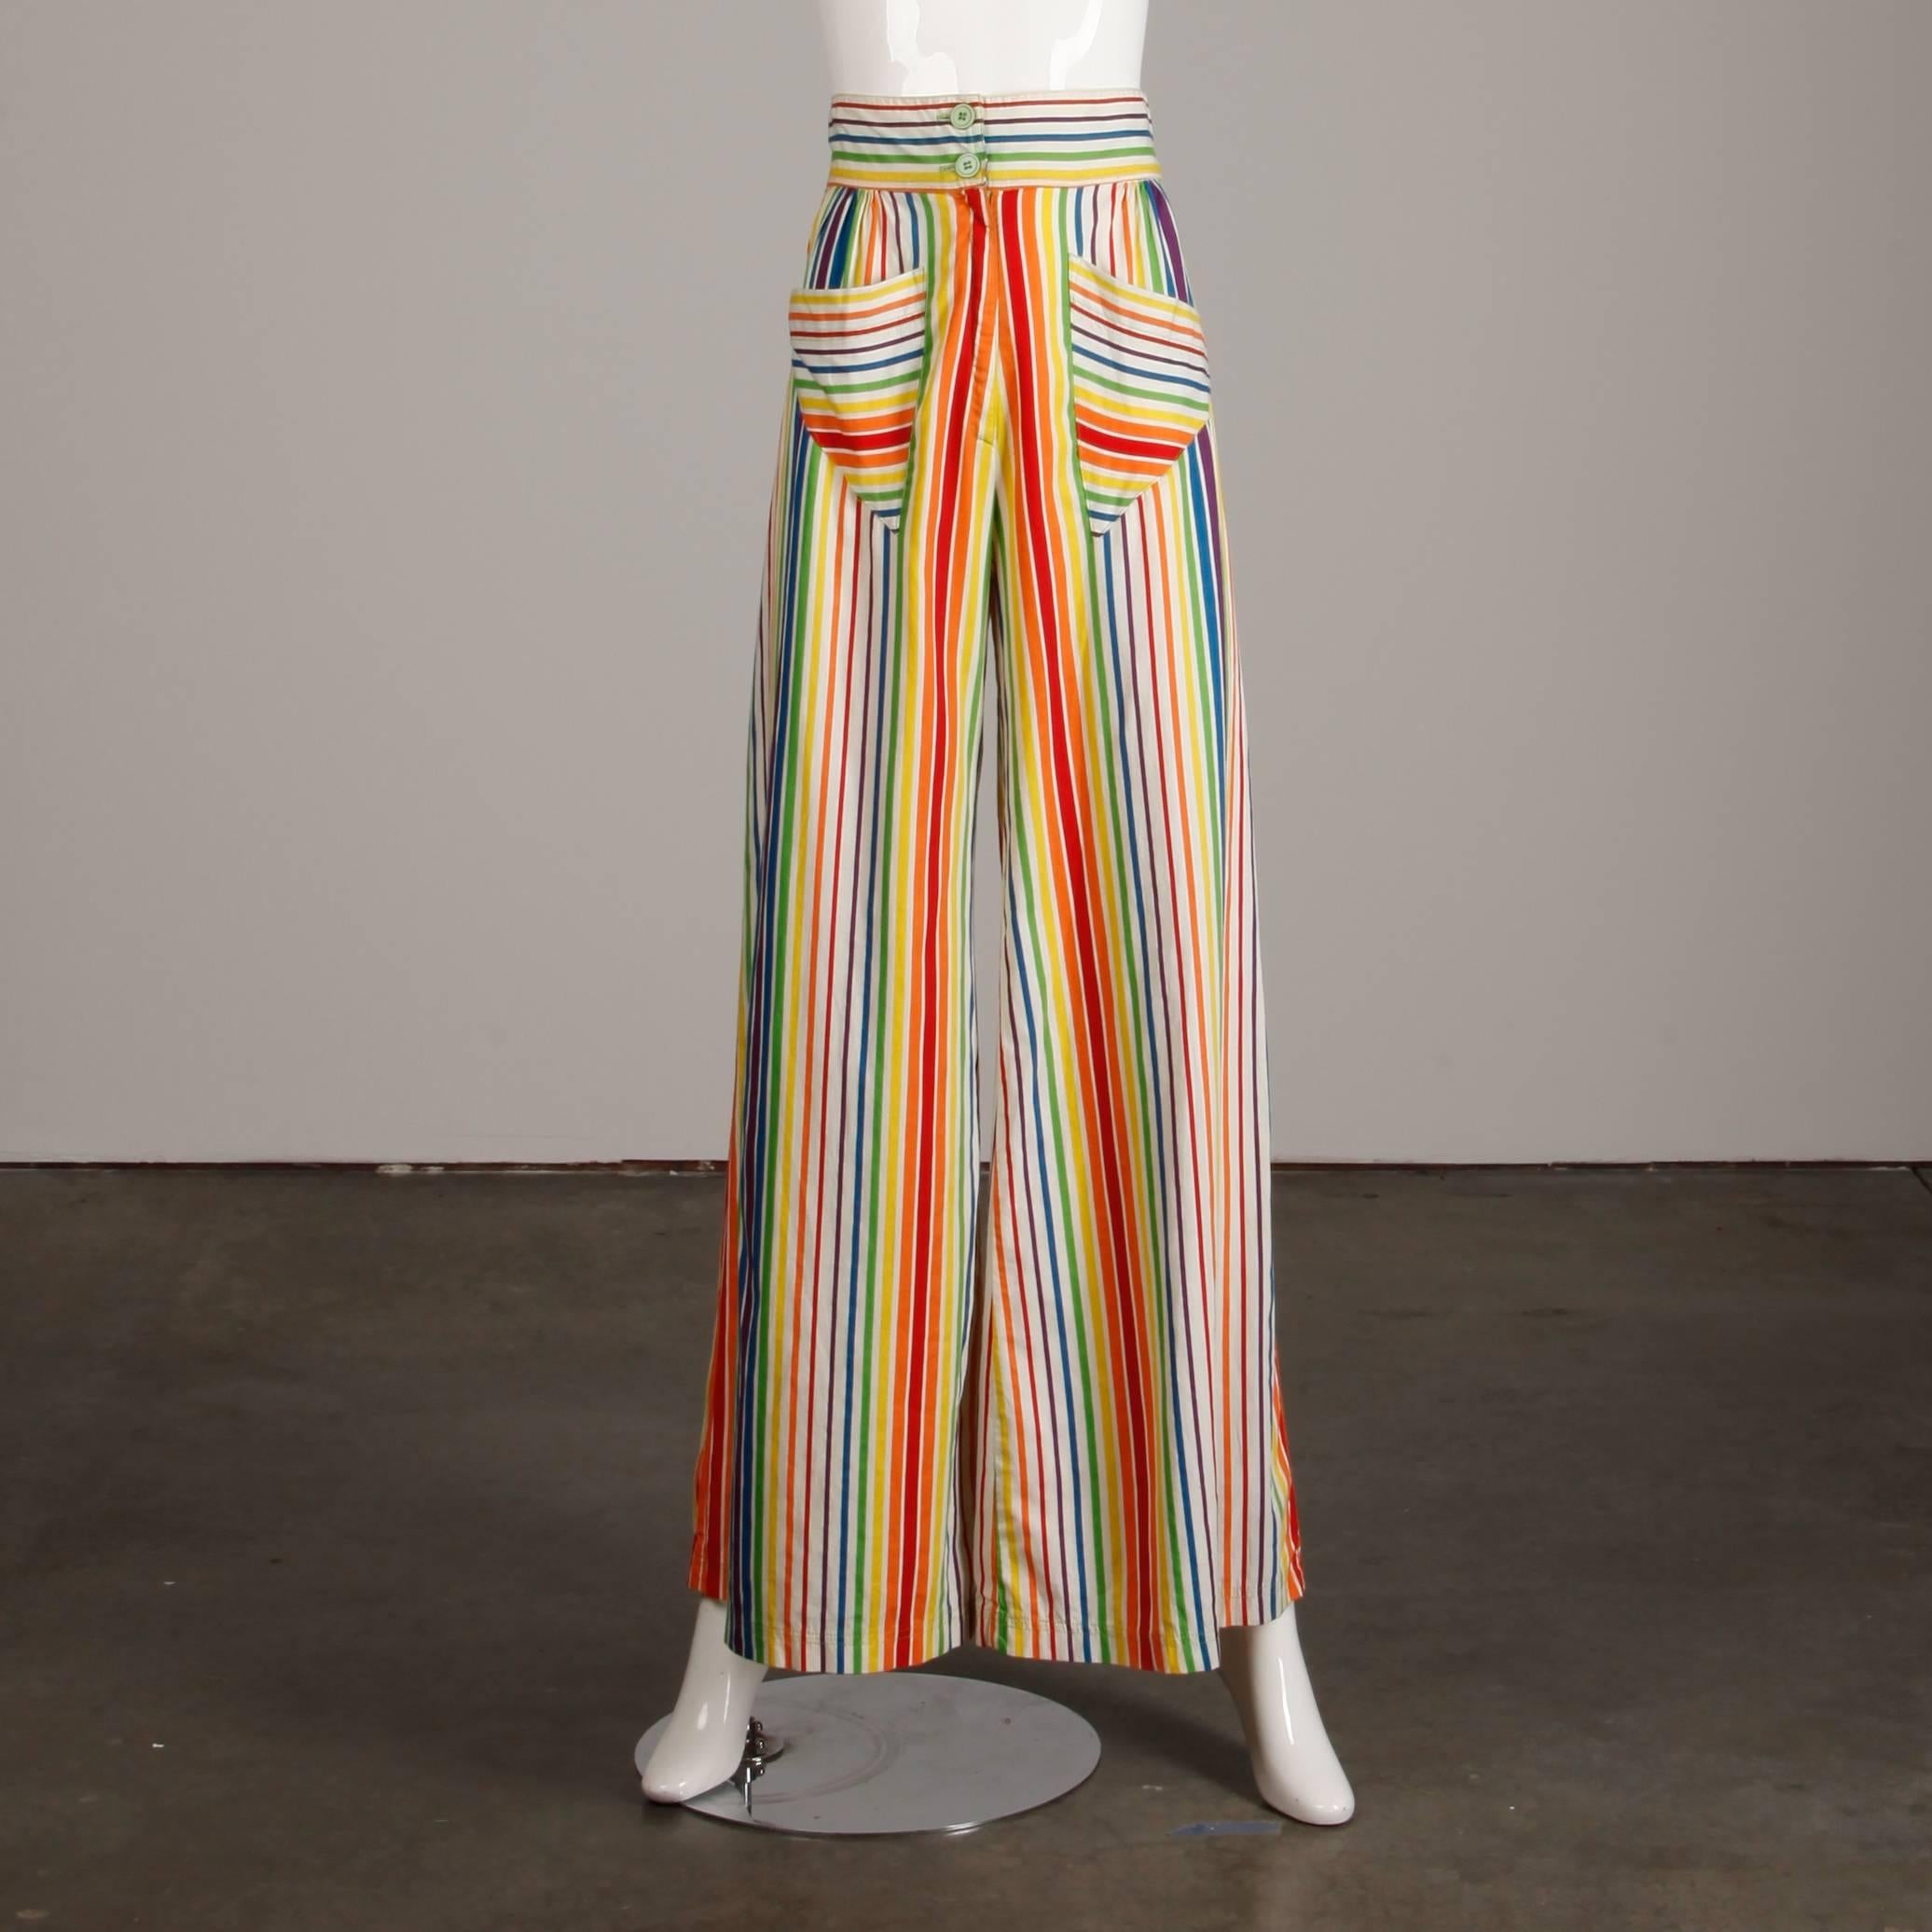 Betsey Johnson for Alley Cat Vintage Rainbow Striped Palazzo Pants, 1970s For Sale 2